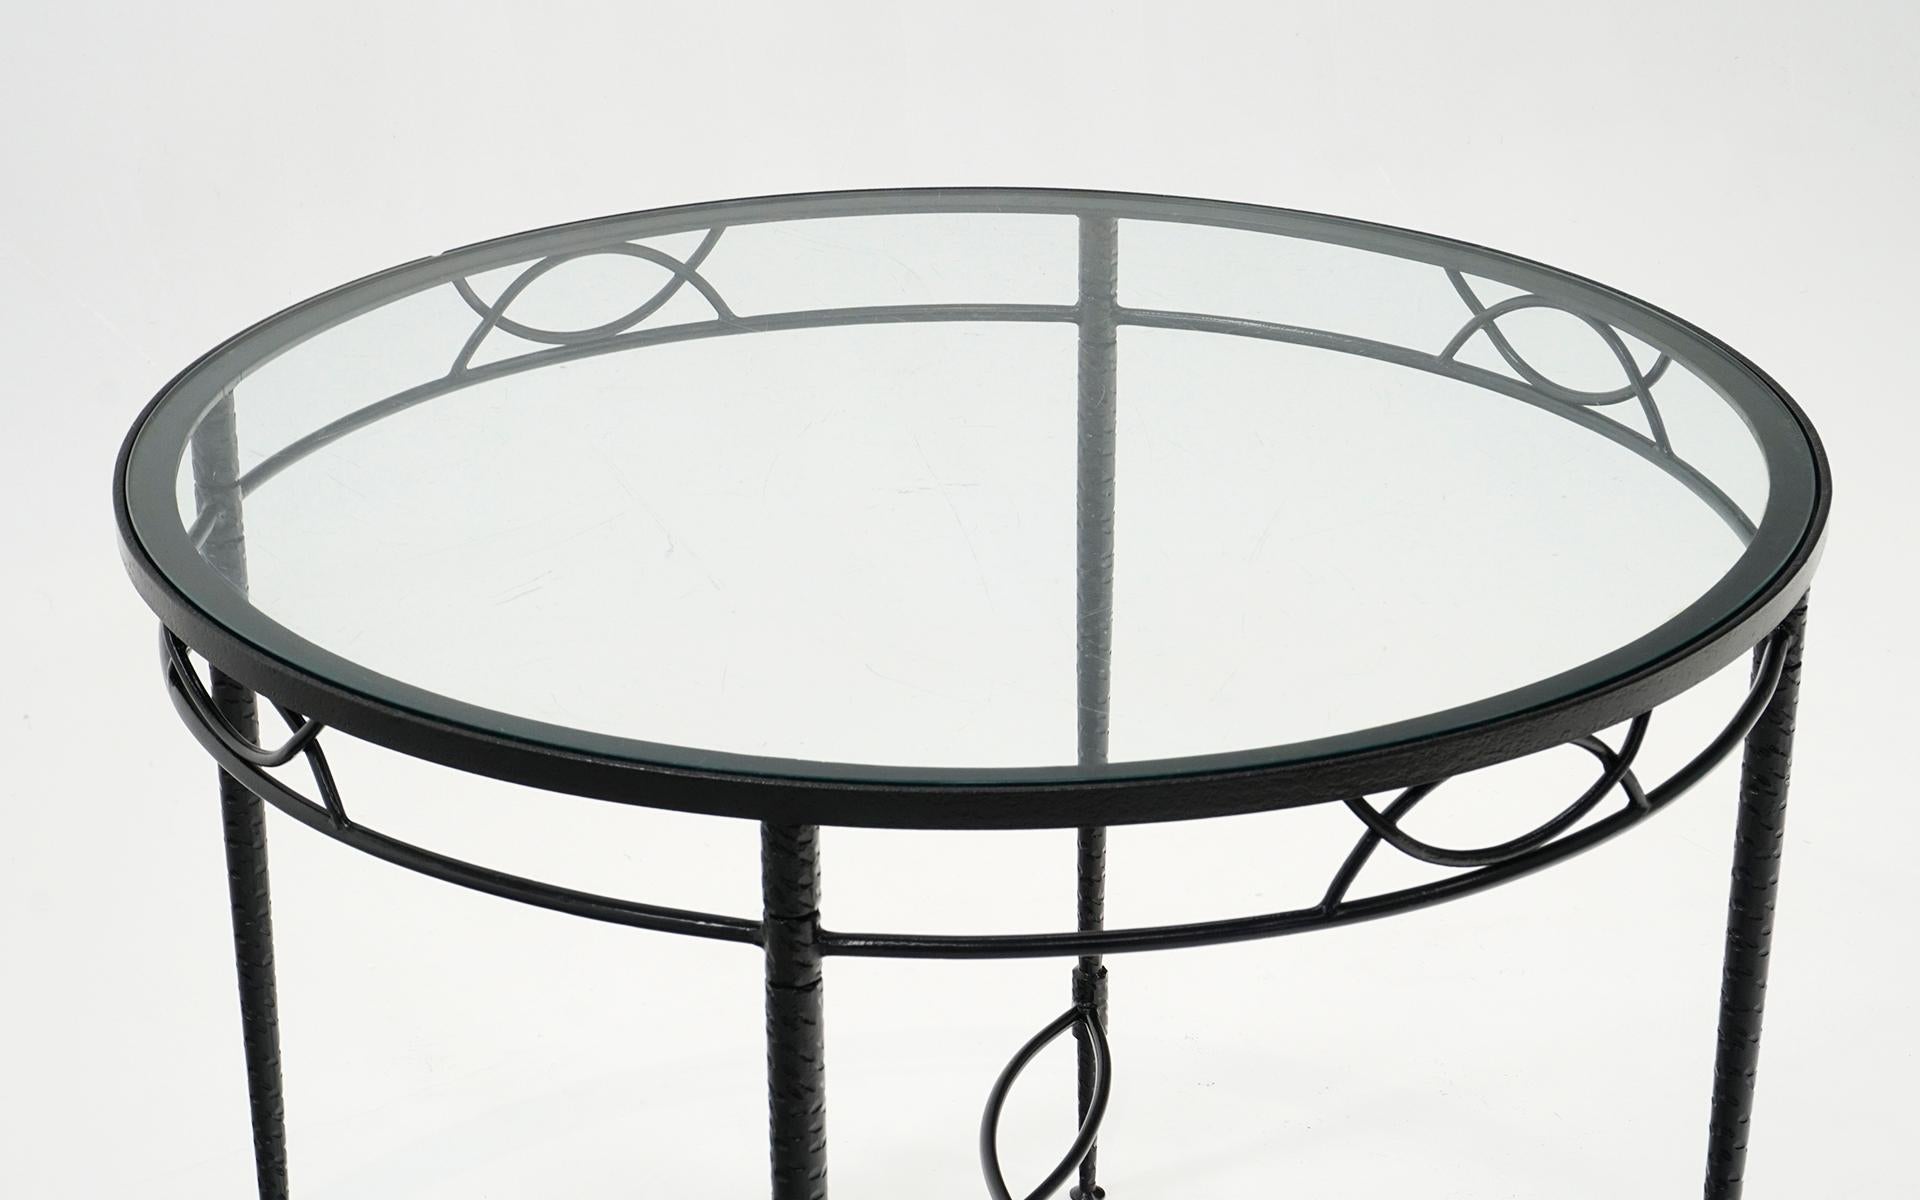 American Outdoor Round Dining Table by Mario Papperzini for John Salterini